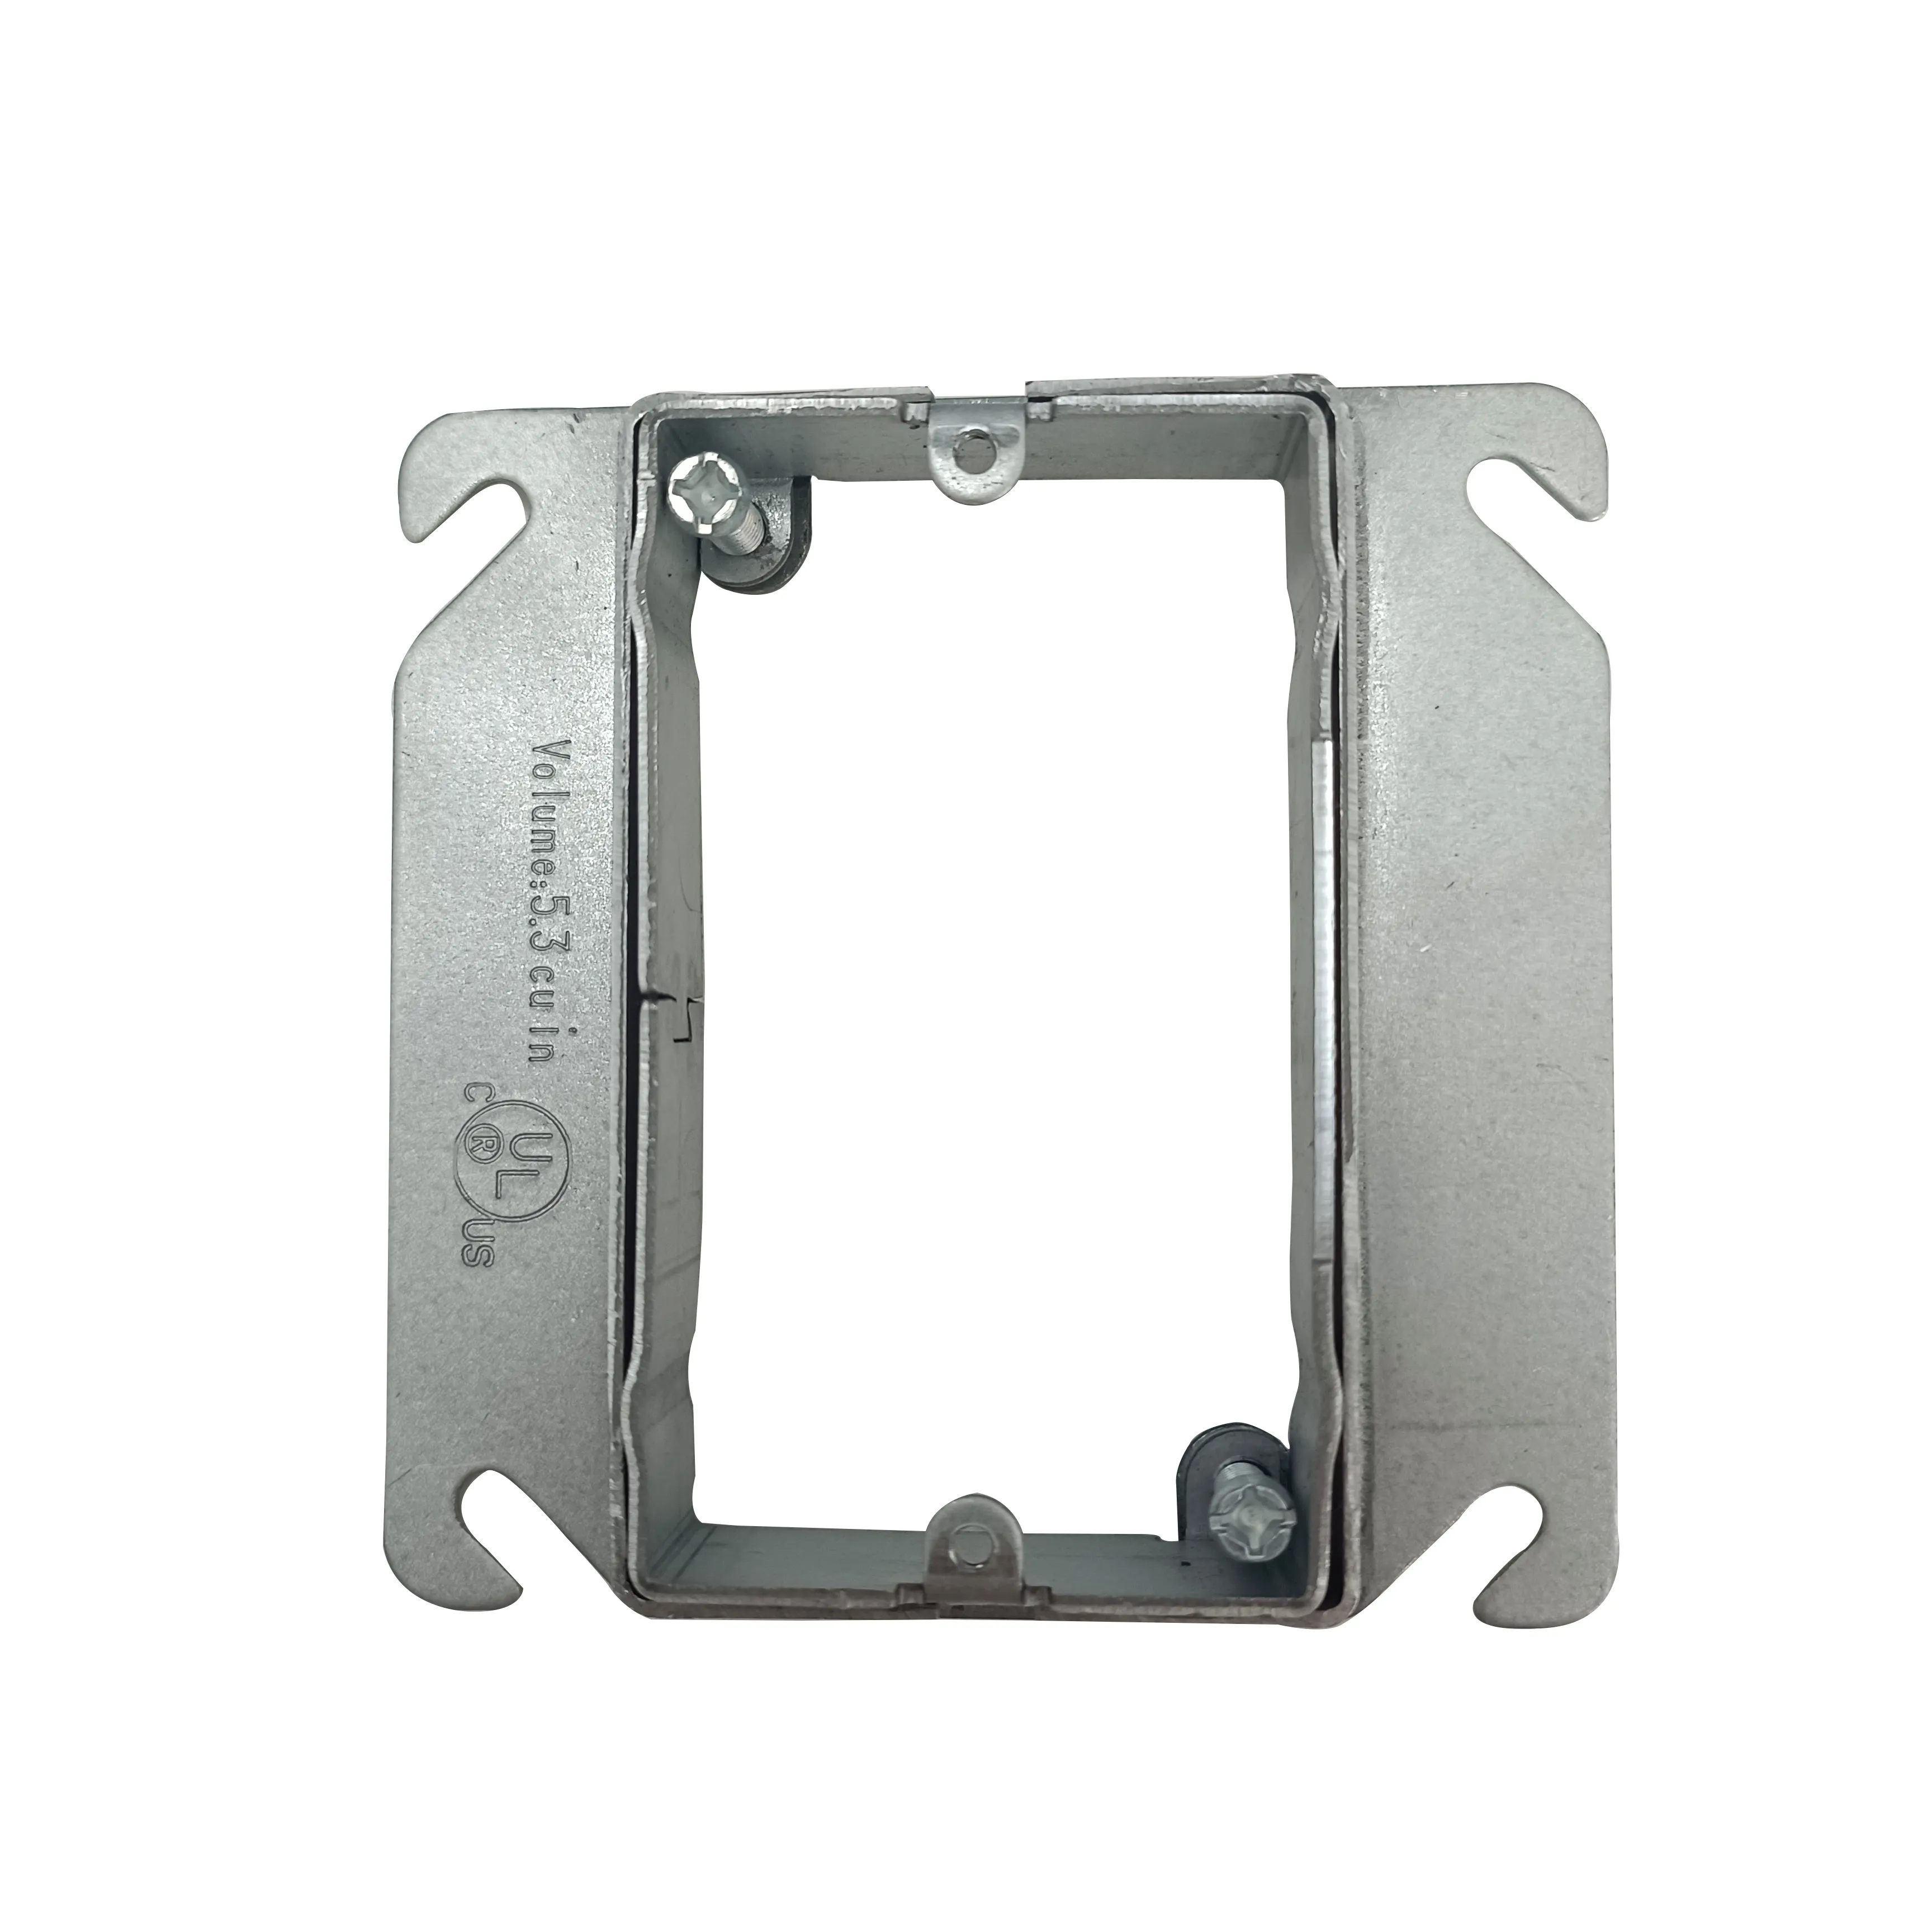 4" Square Single Gang Device Cover Raised 5/8" Galvanized Steel Mud Ring Silver Drawn For Box Adjustable Plaster Ring